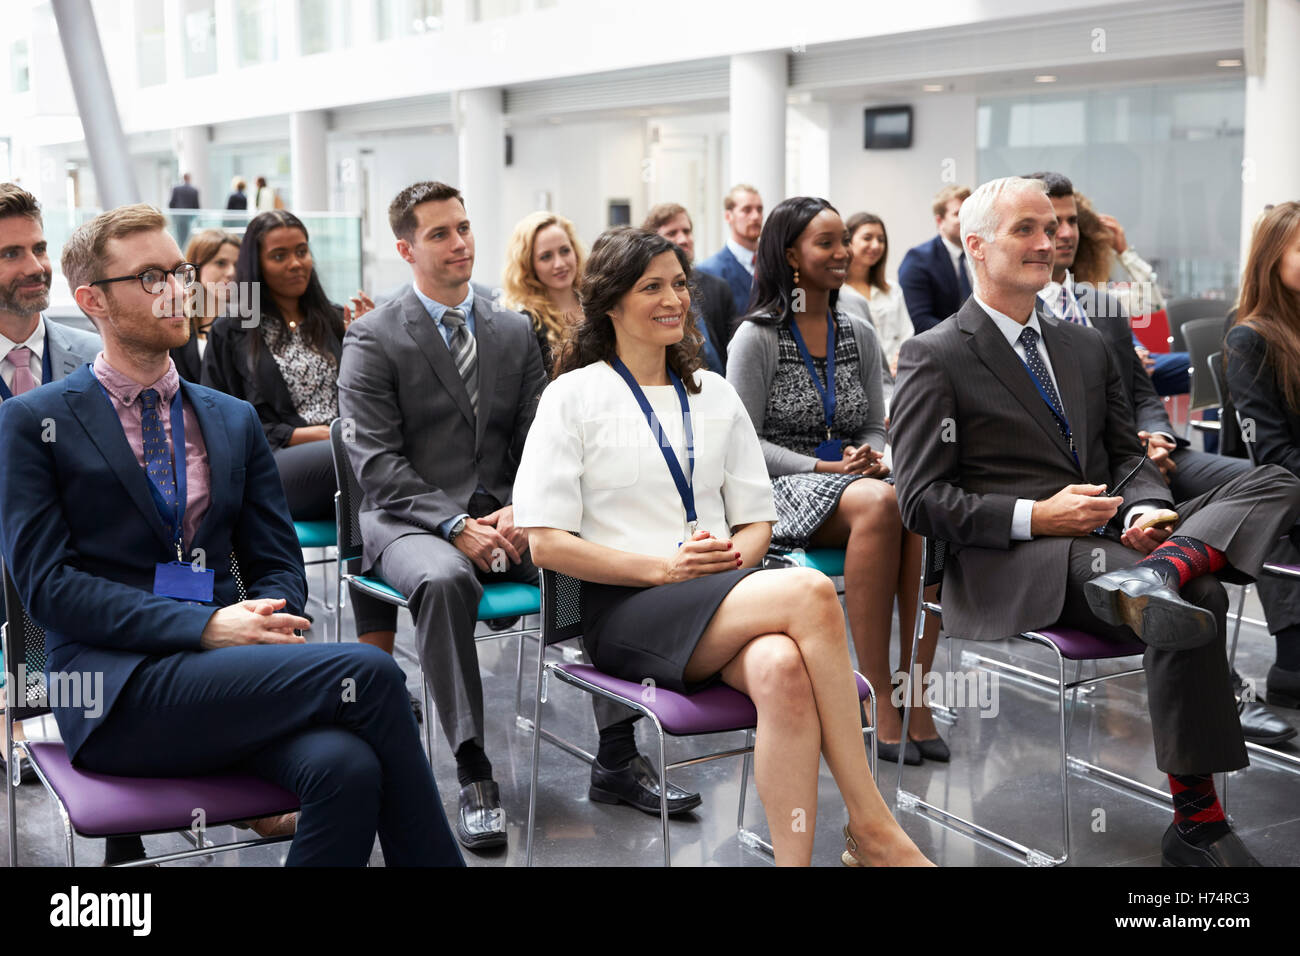 Audience Listening To Speaker At Conference Presentation Stock Photo